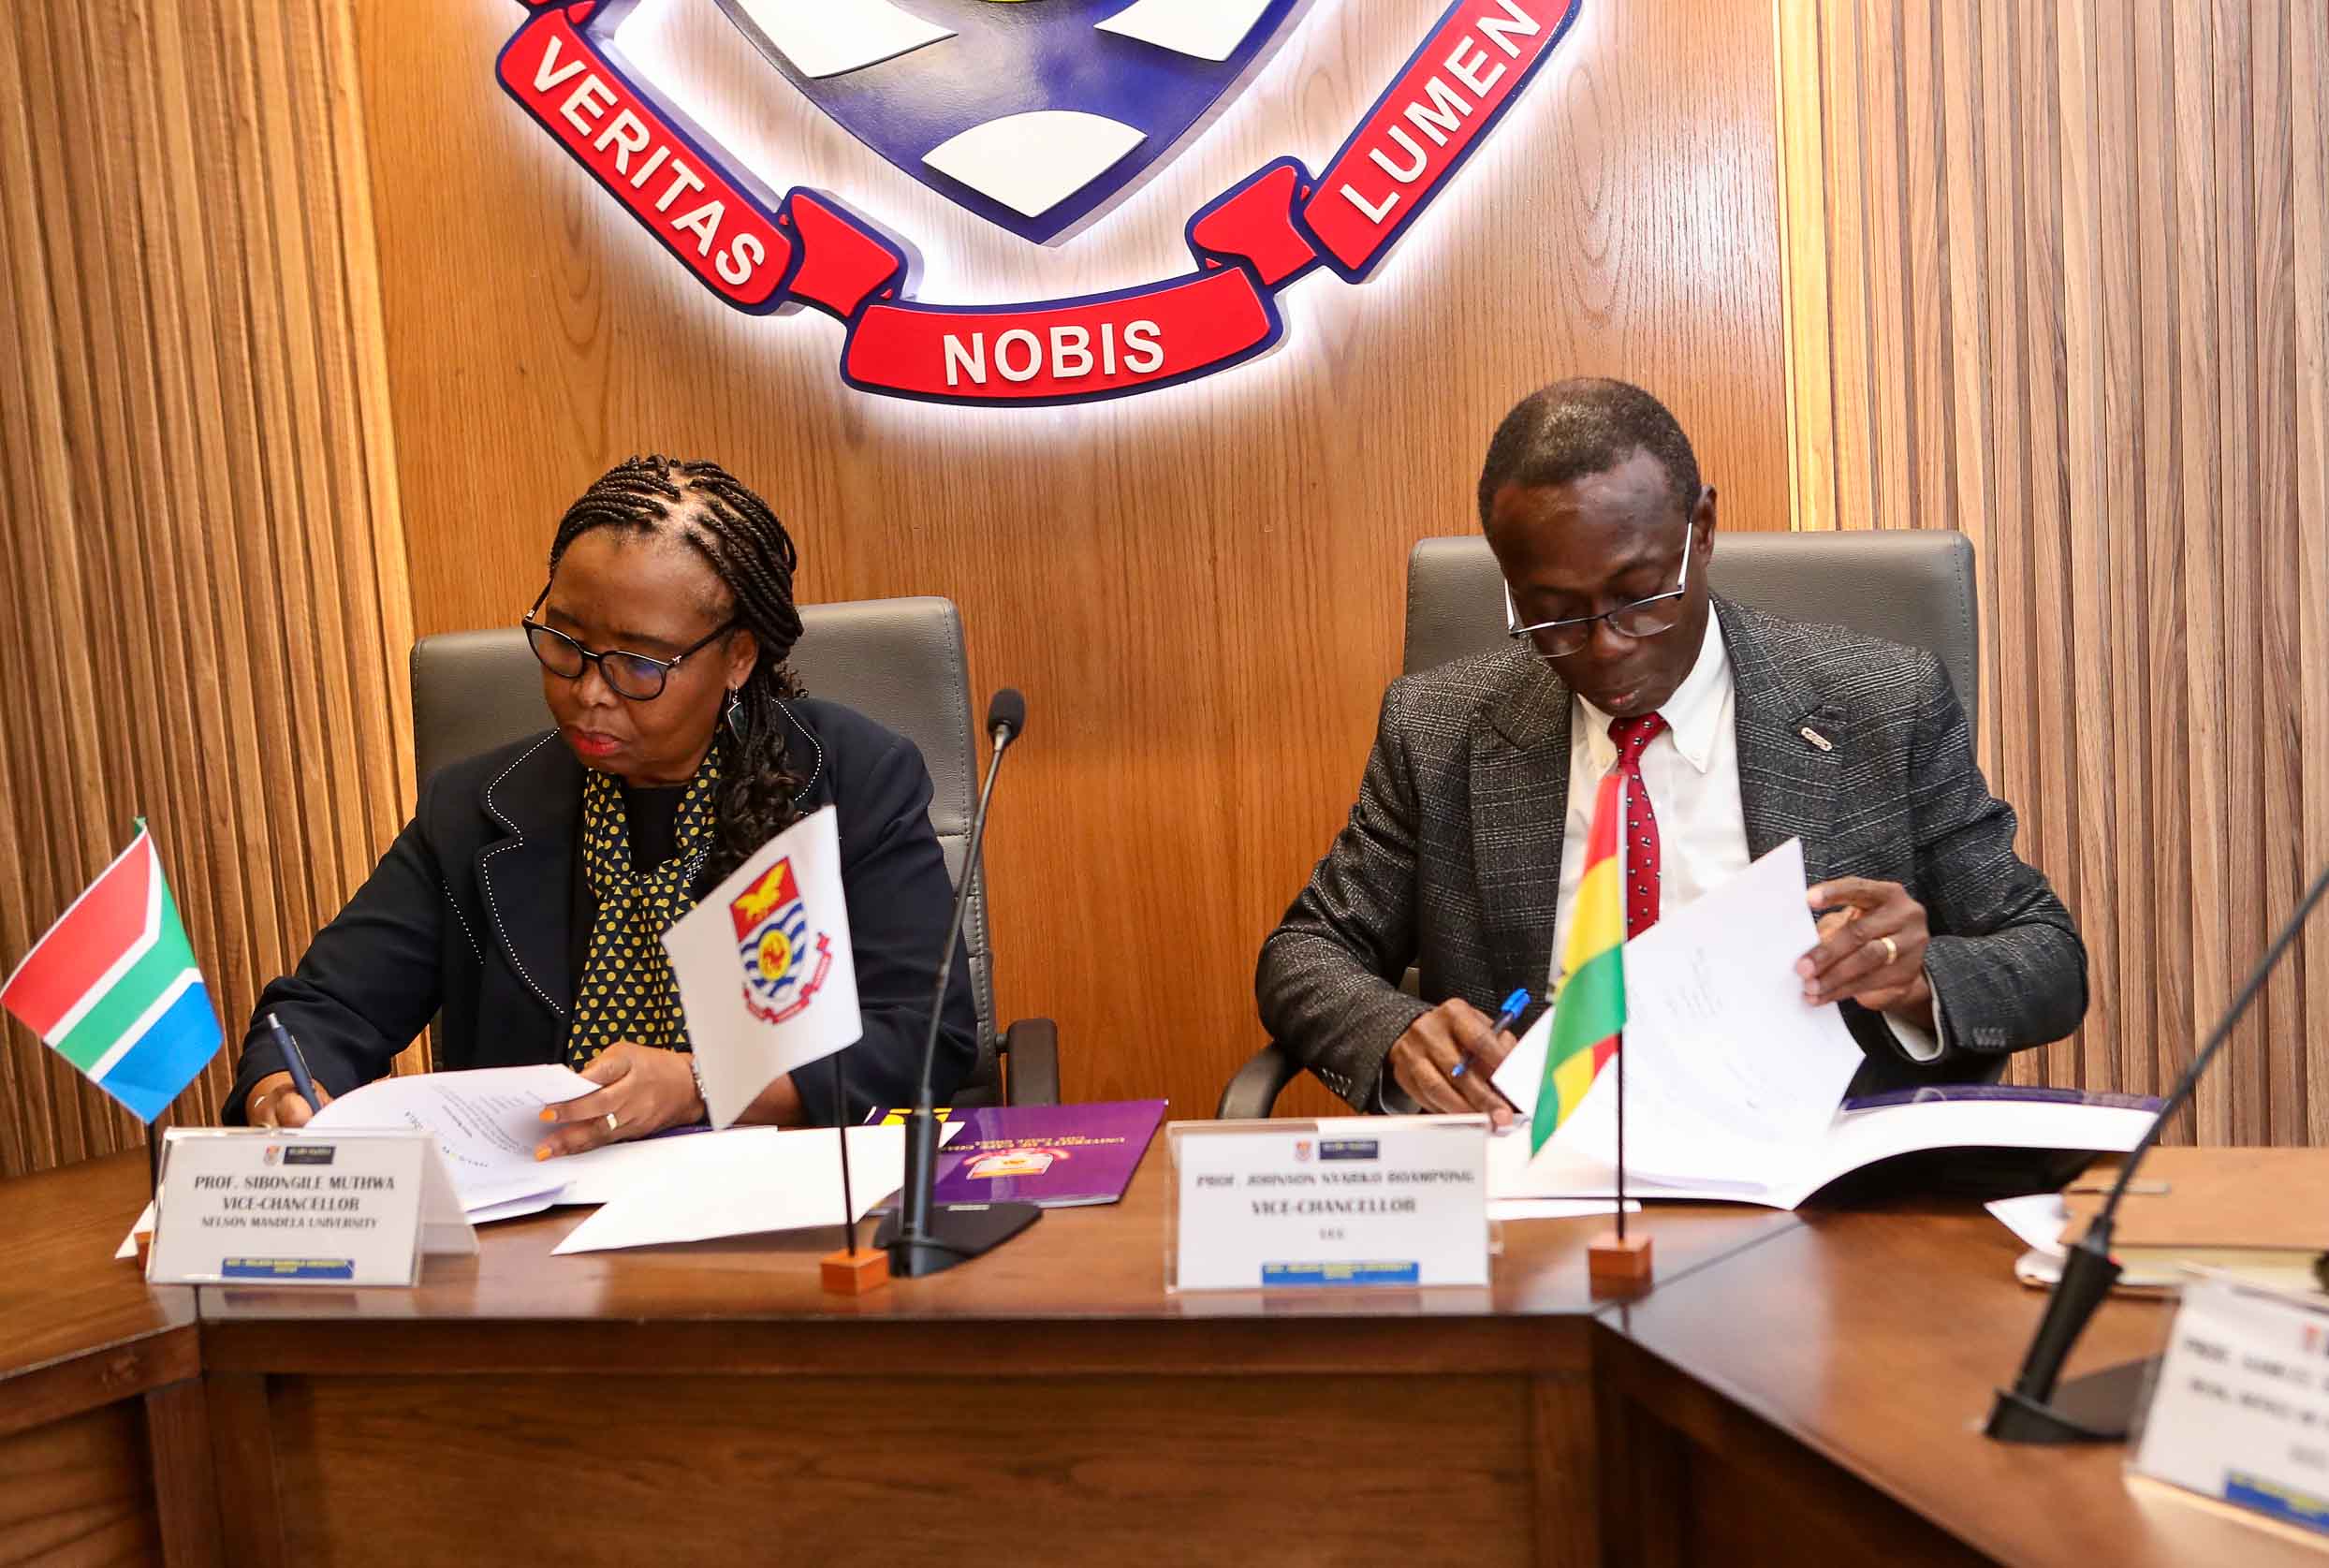 Signing of the MoU